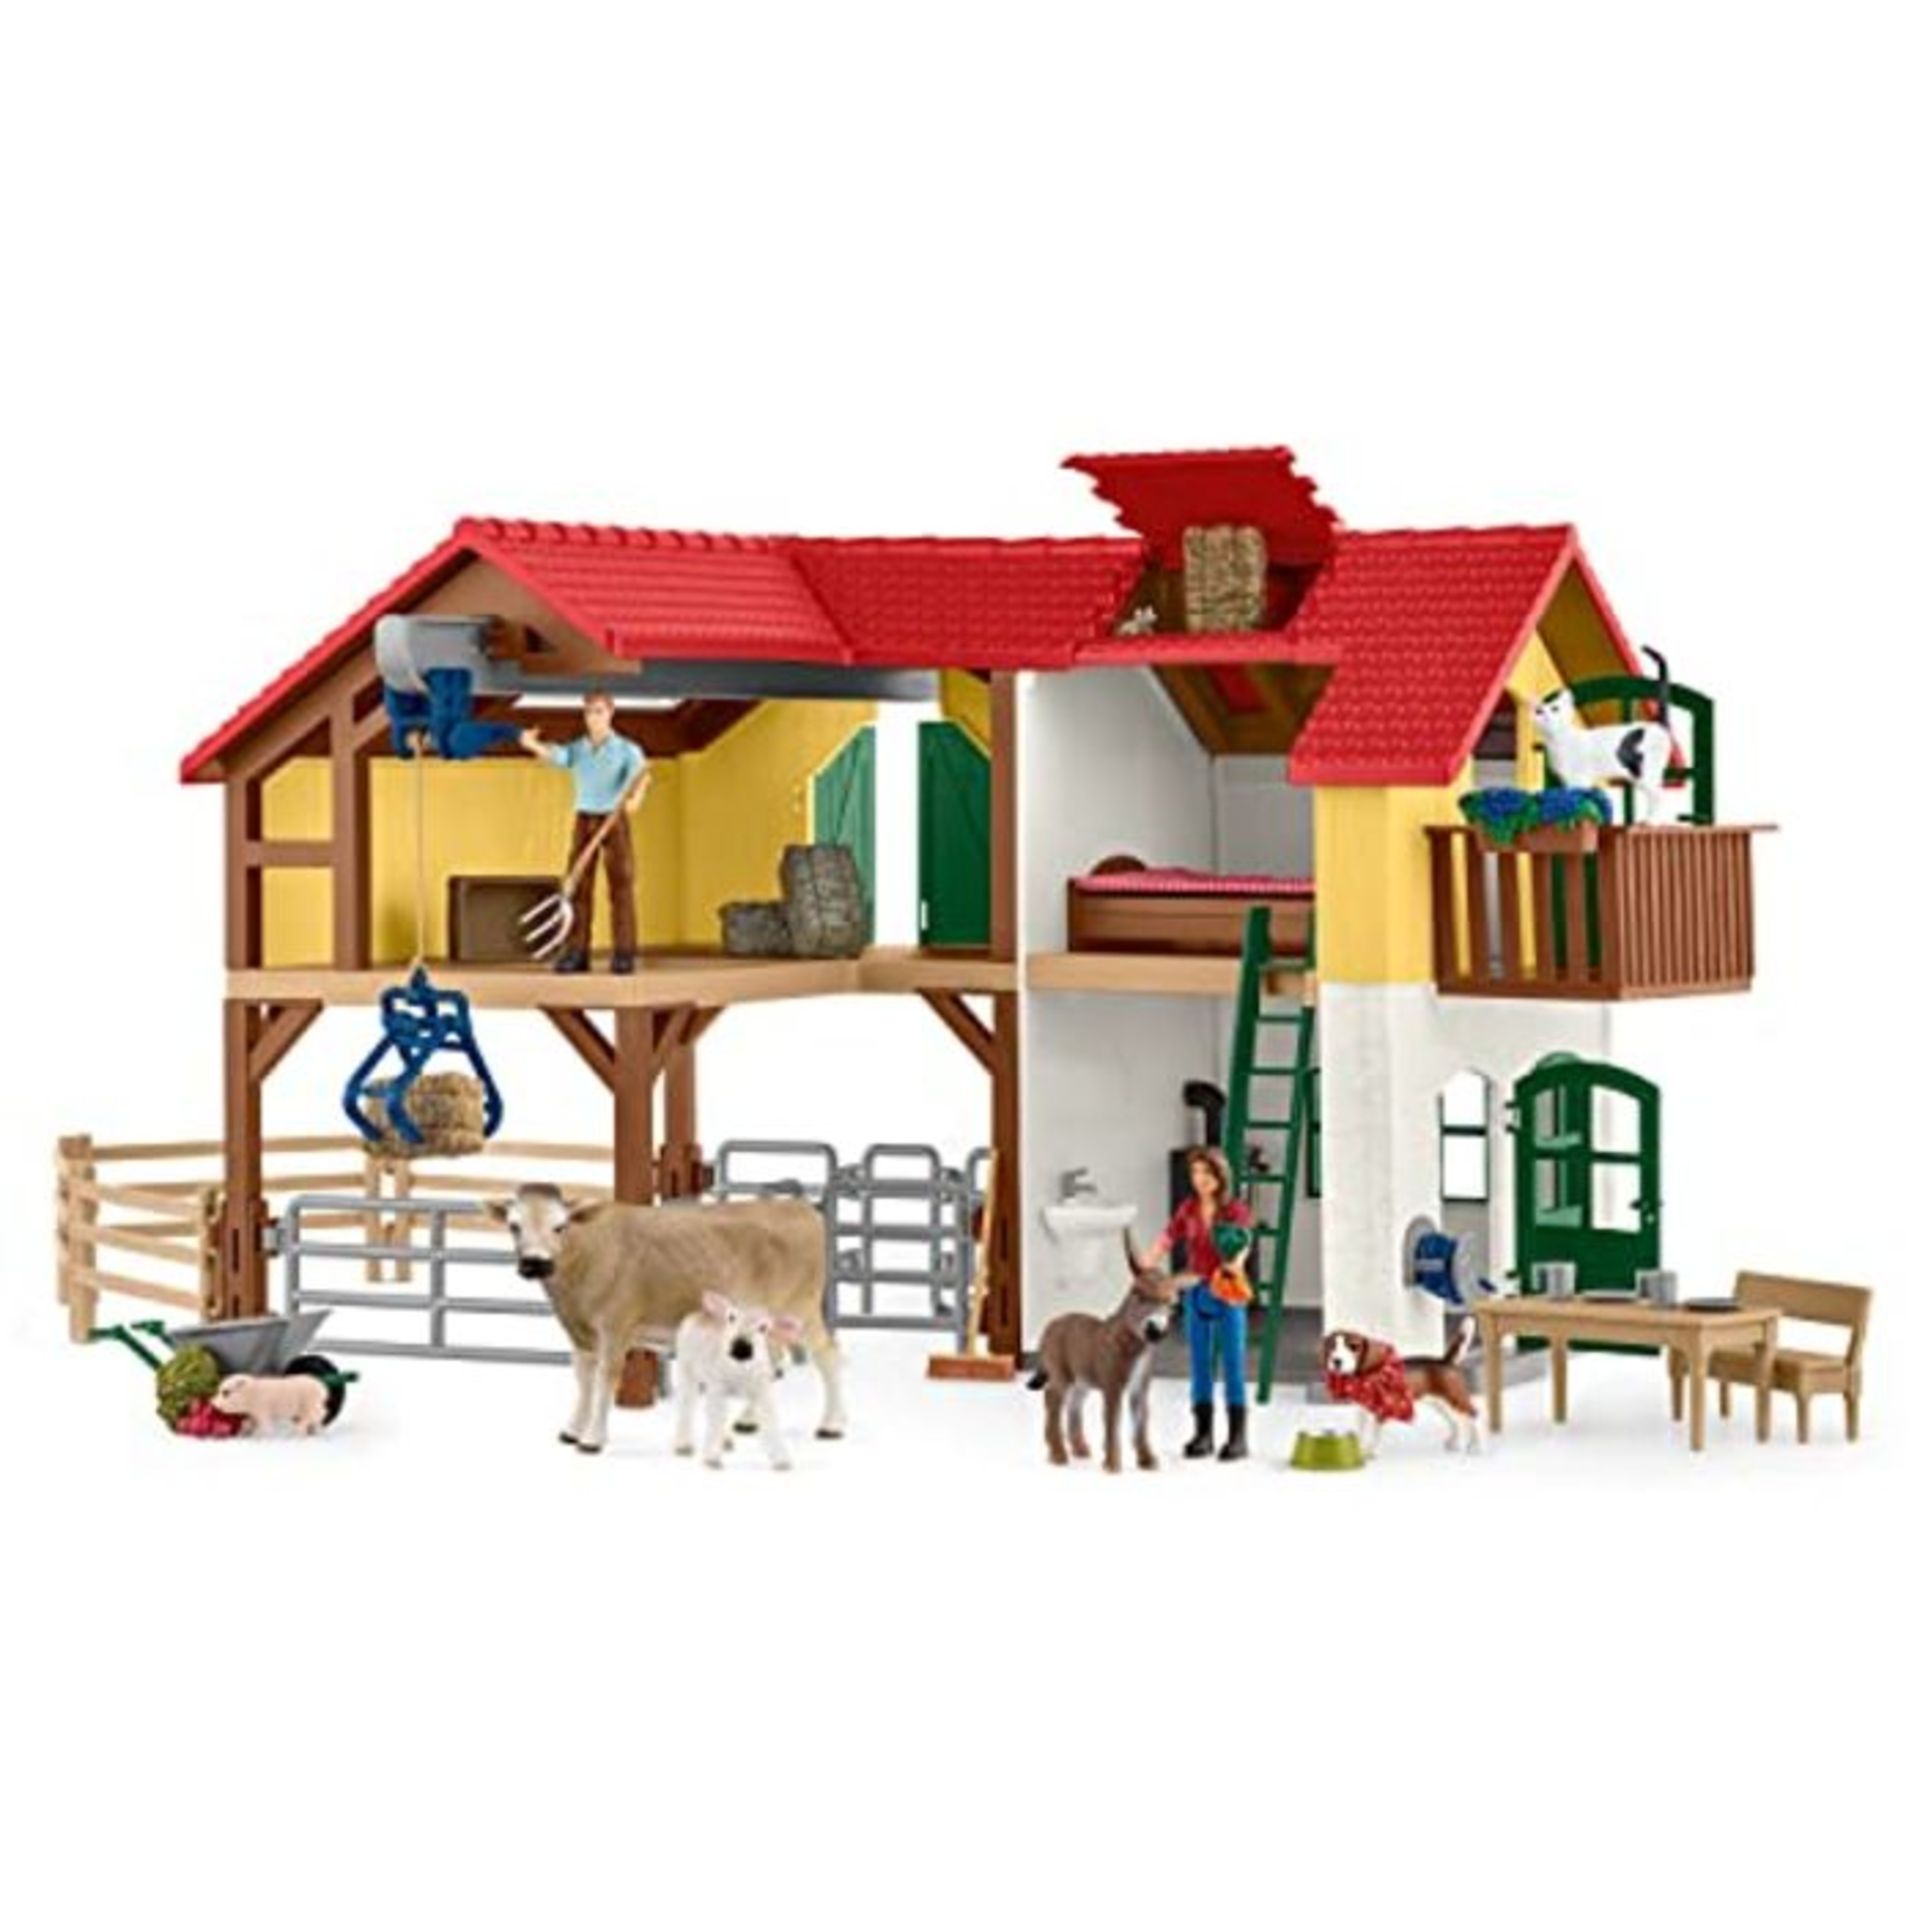 RRP £59.00 SCHLEICH 42407n Large Farm House Farm World Toy Playset for children aged 3-8 Years